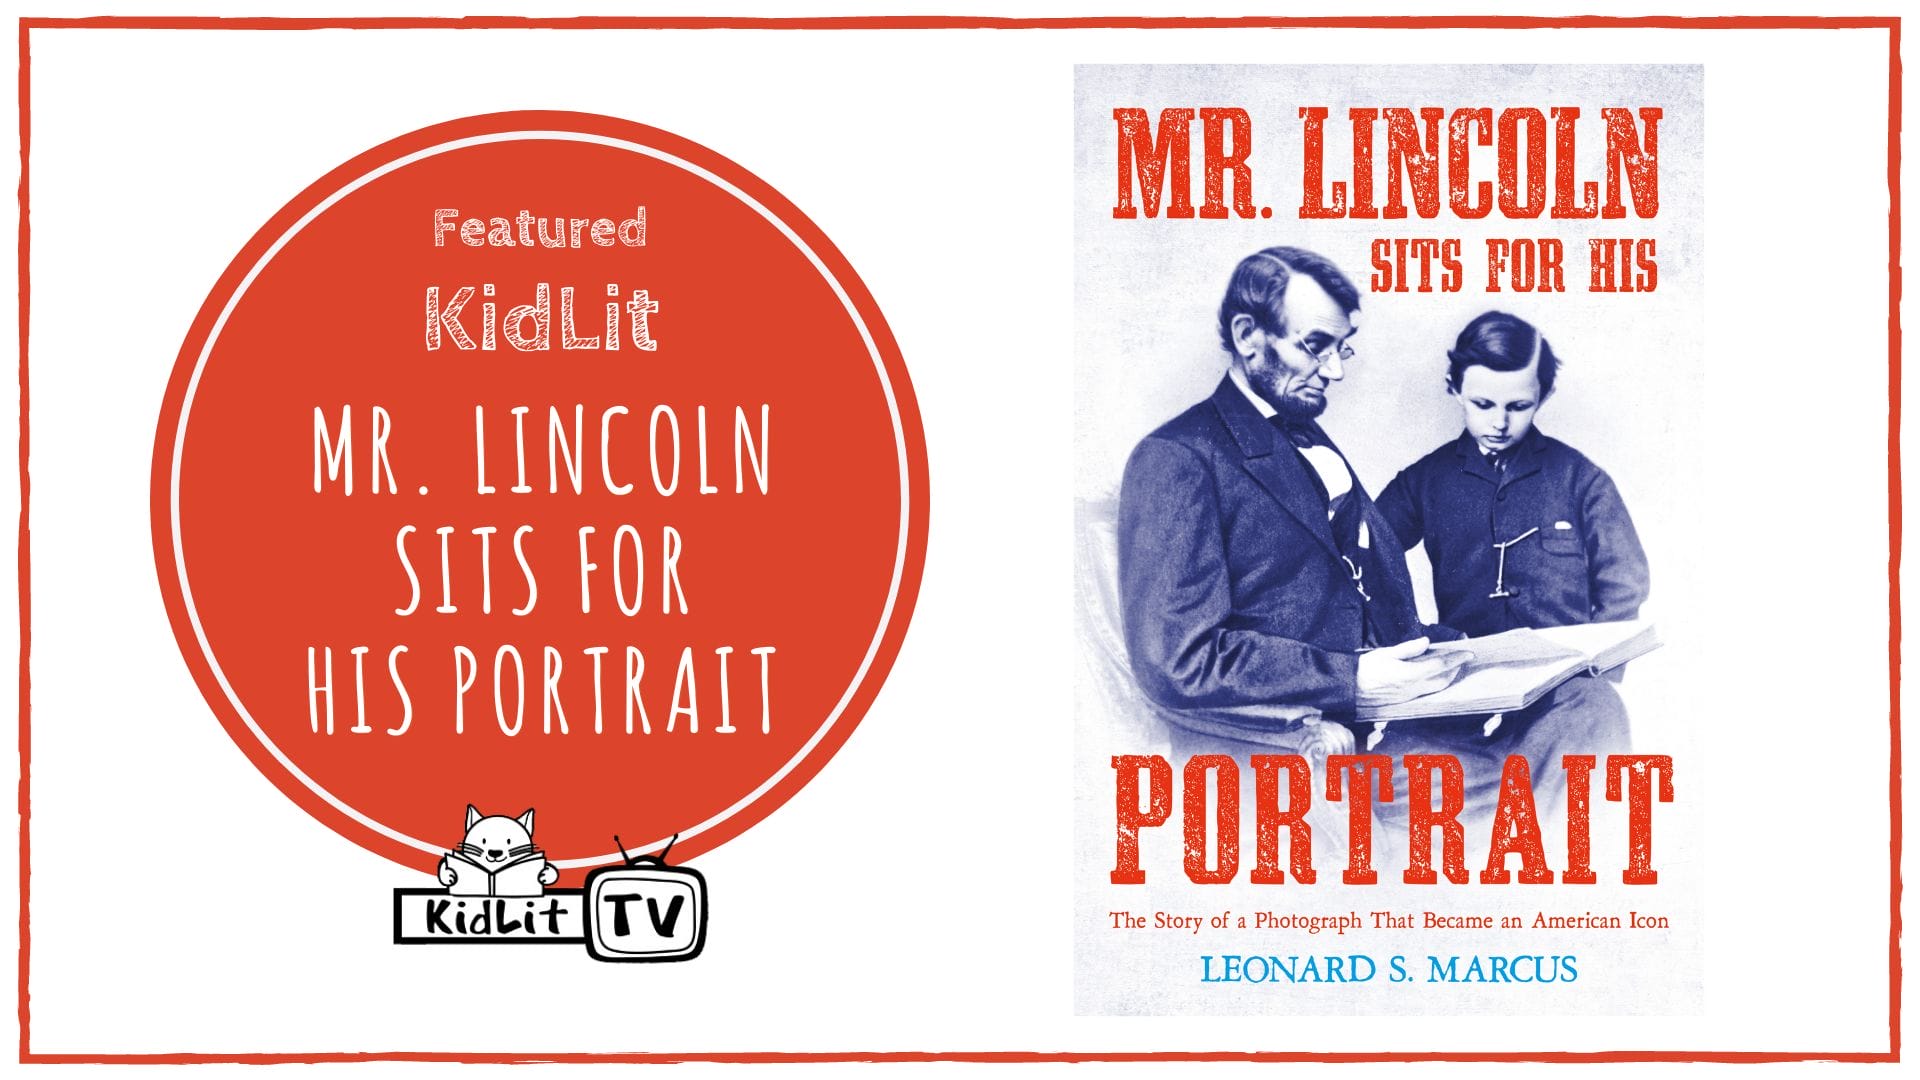 https://e825yiqcosb.exactdn.com/wp-content/uploads/2022/12/Featured-KidLit-MR-LINCOLN-SITS-FOR-HIS-PORTRAIT-by-Leonard-Marcus-kidlit-tv.png